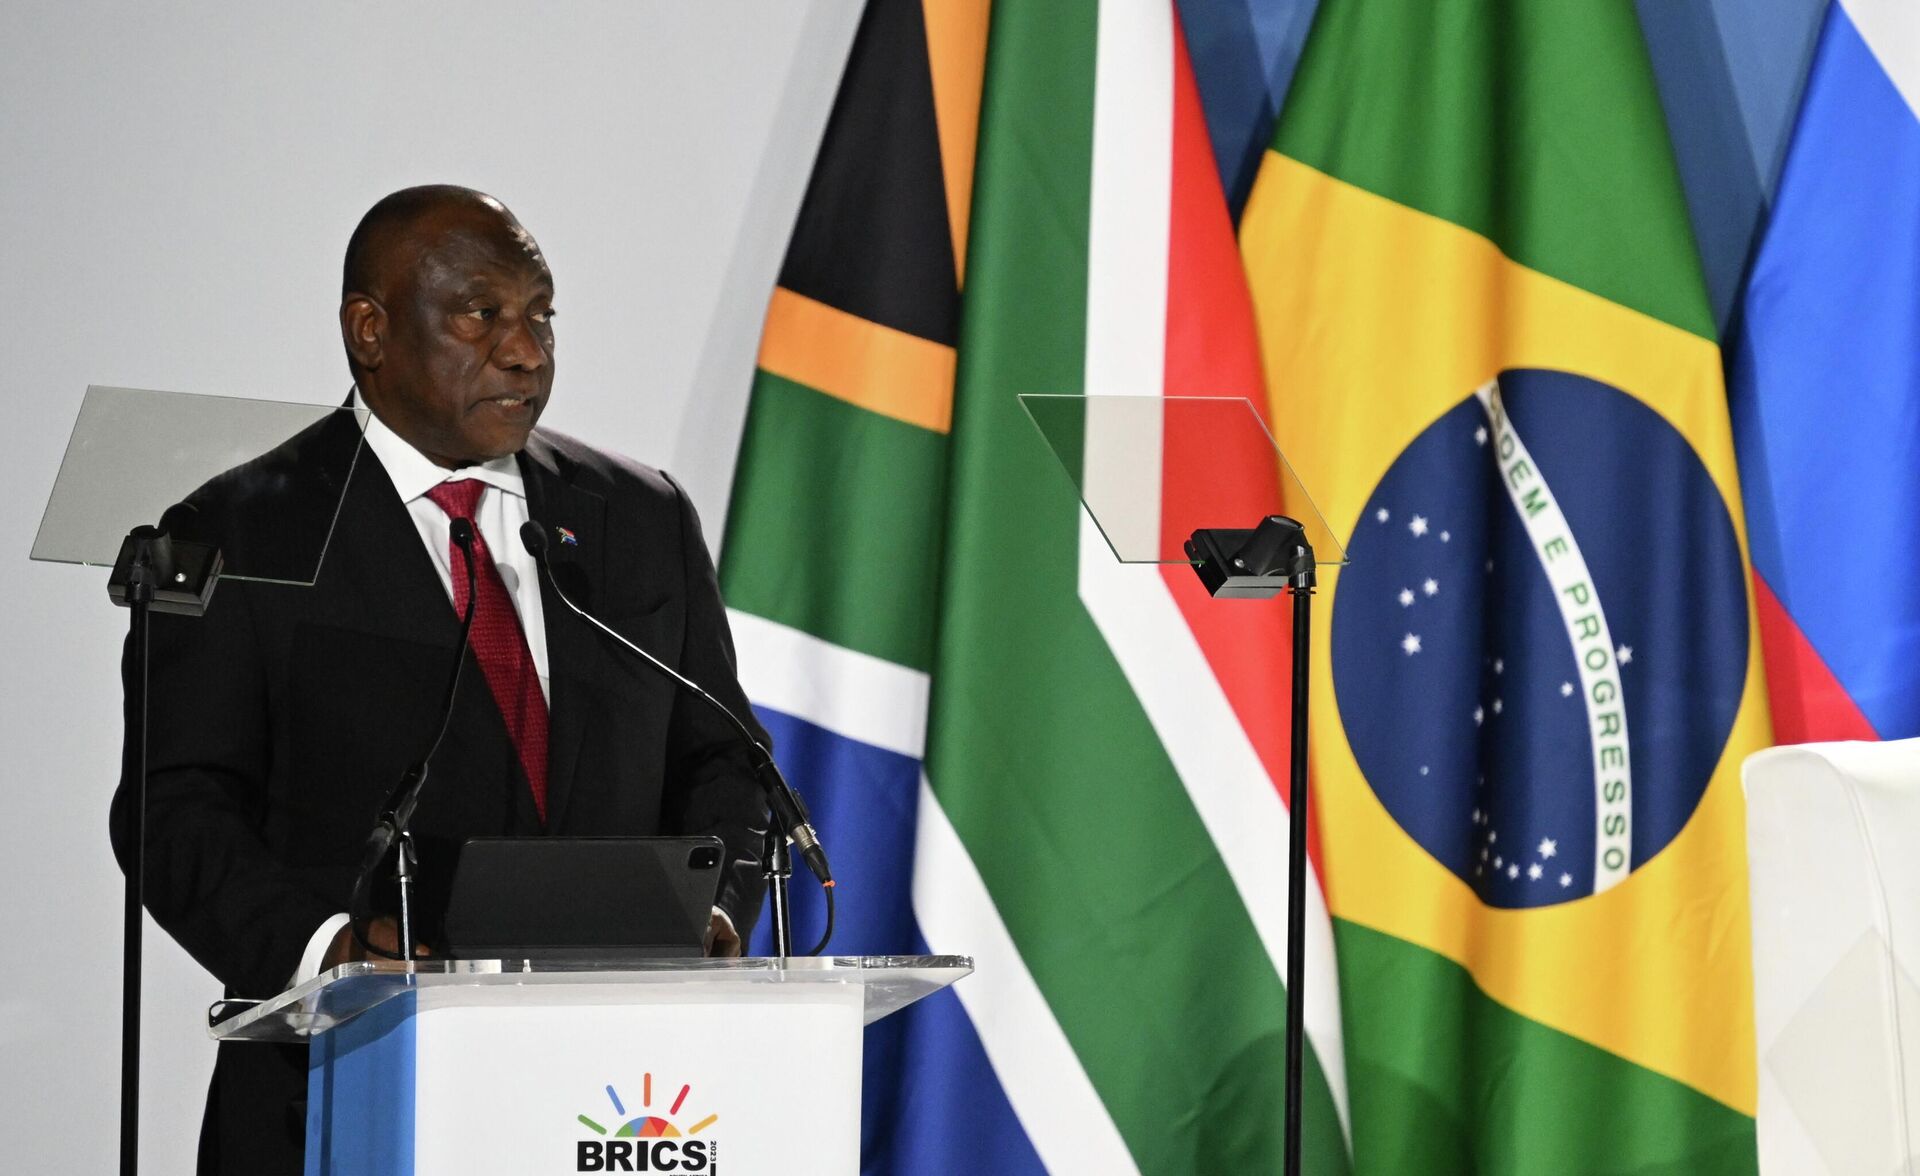 South African President Cyril Ramaphosa Delivers a Speech at the 15th BRICS Summit in Johannesburg, South Africa - Sputnik International, 1920, 22.08.2023